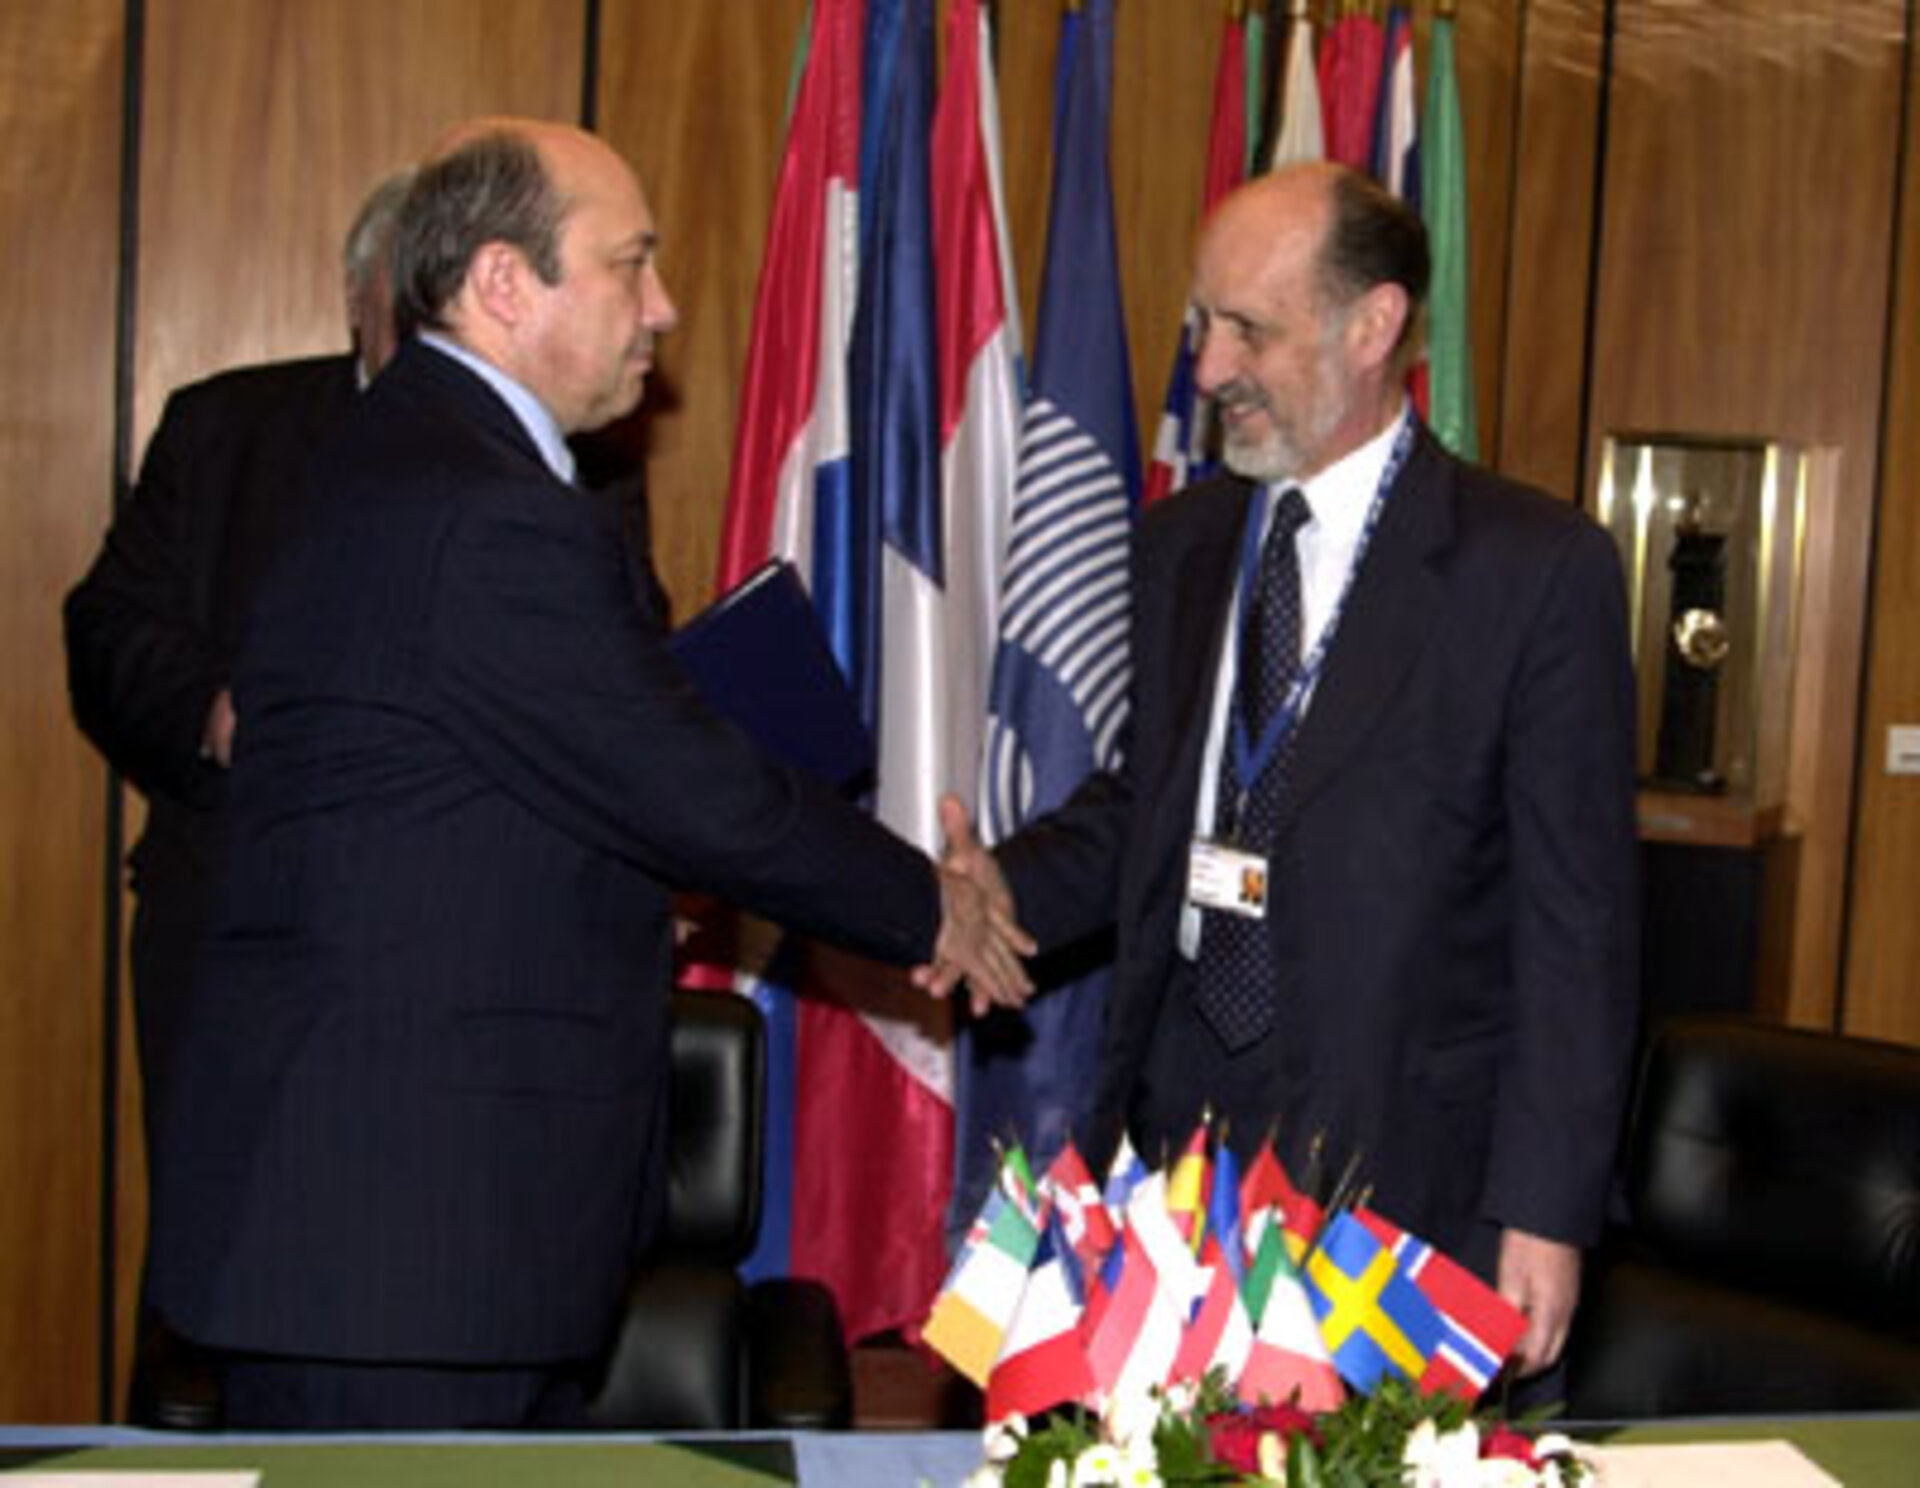 The Russian Foreign Minister and the Director General of ESA